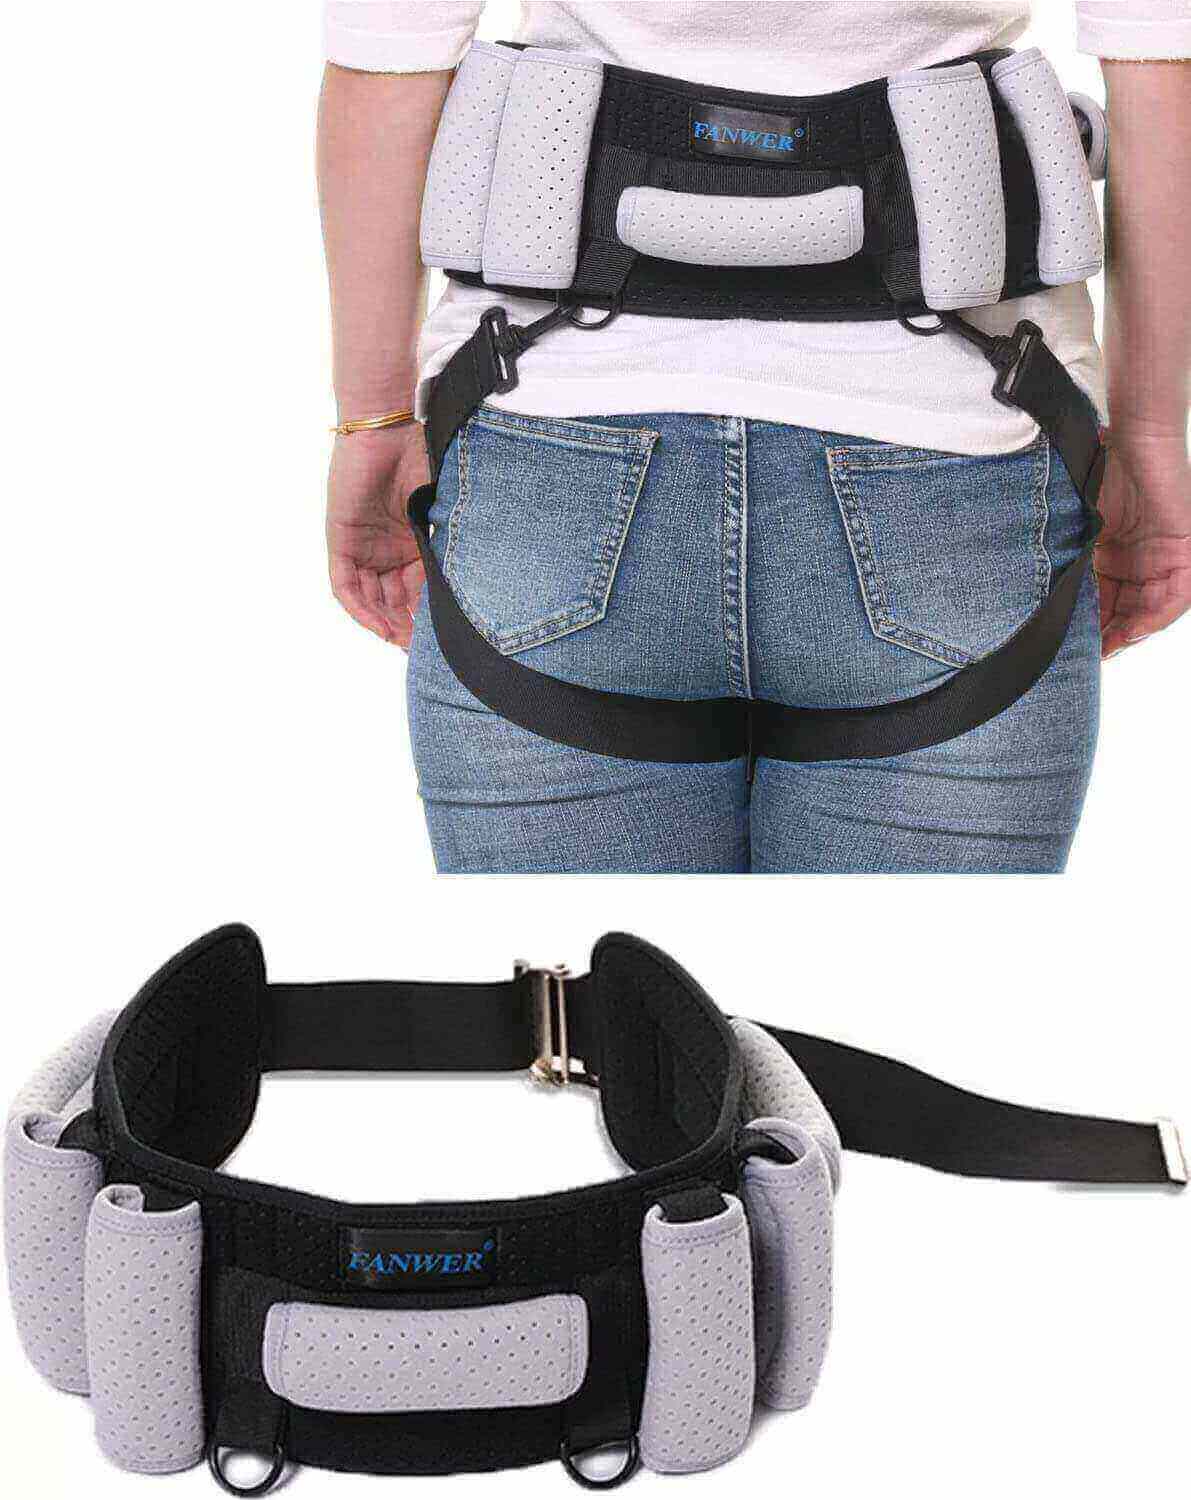 Fanwer transfer gait belt with handles & leg straps for transfer aids, feature image